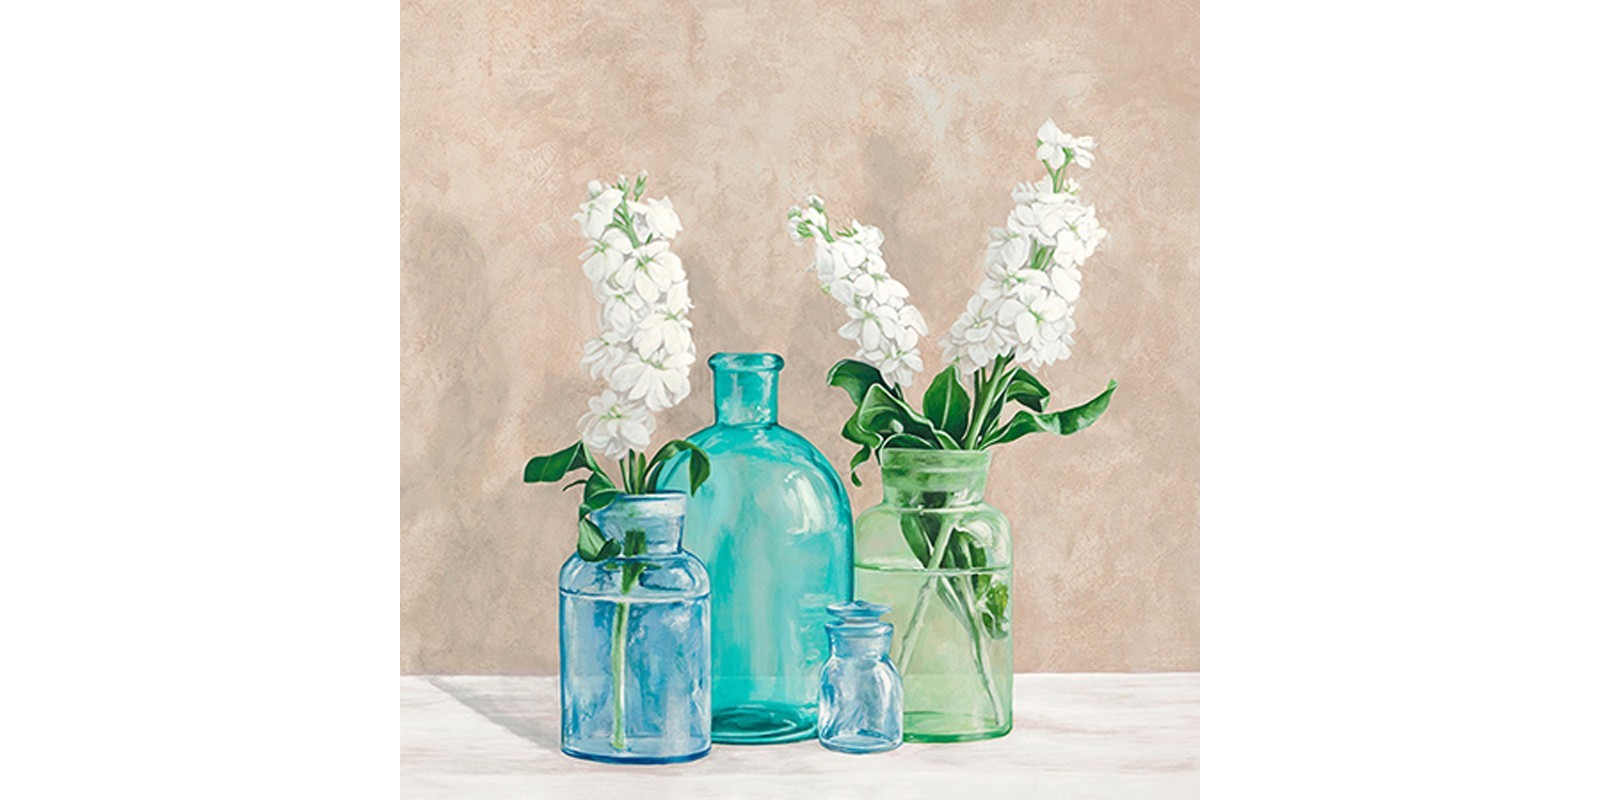 Jenny Thomlinson - Floral setting with glass vases II